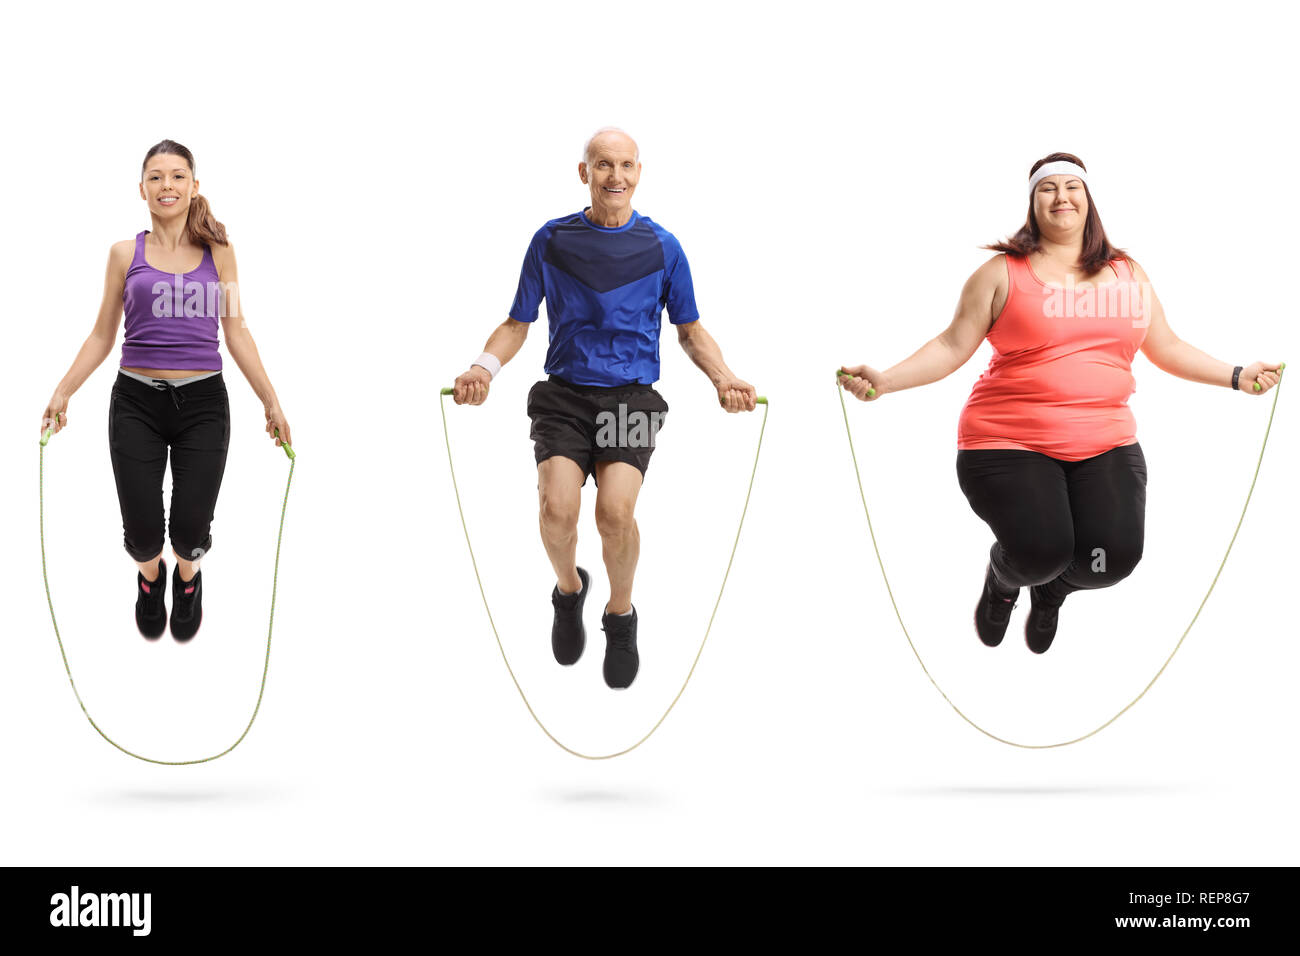 Full length portrait of a group of different people jumping with a skipping rope isolated on white background Stock Photo